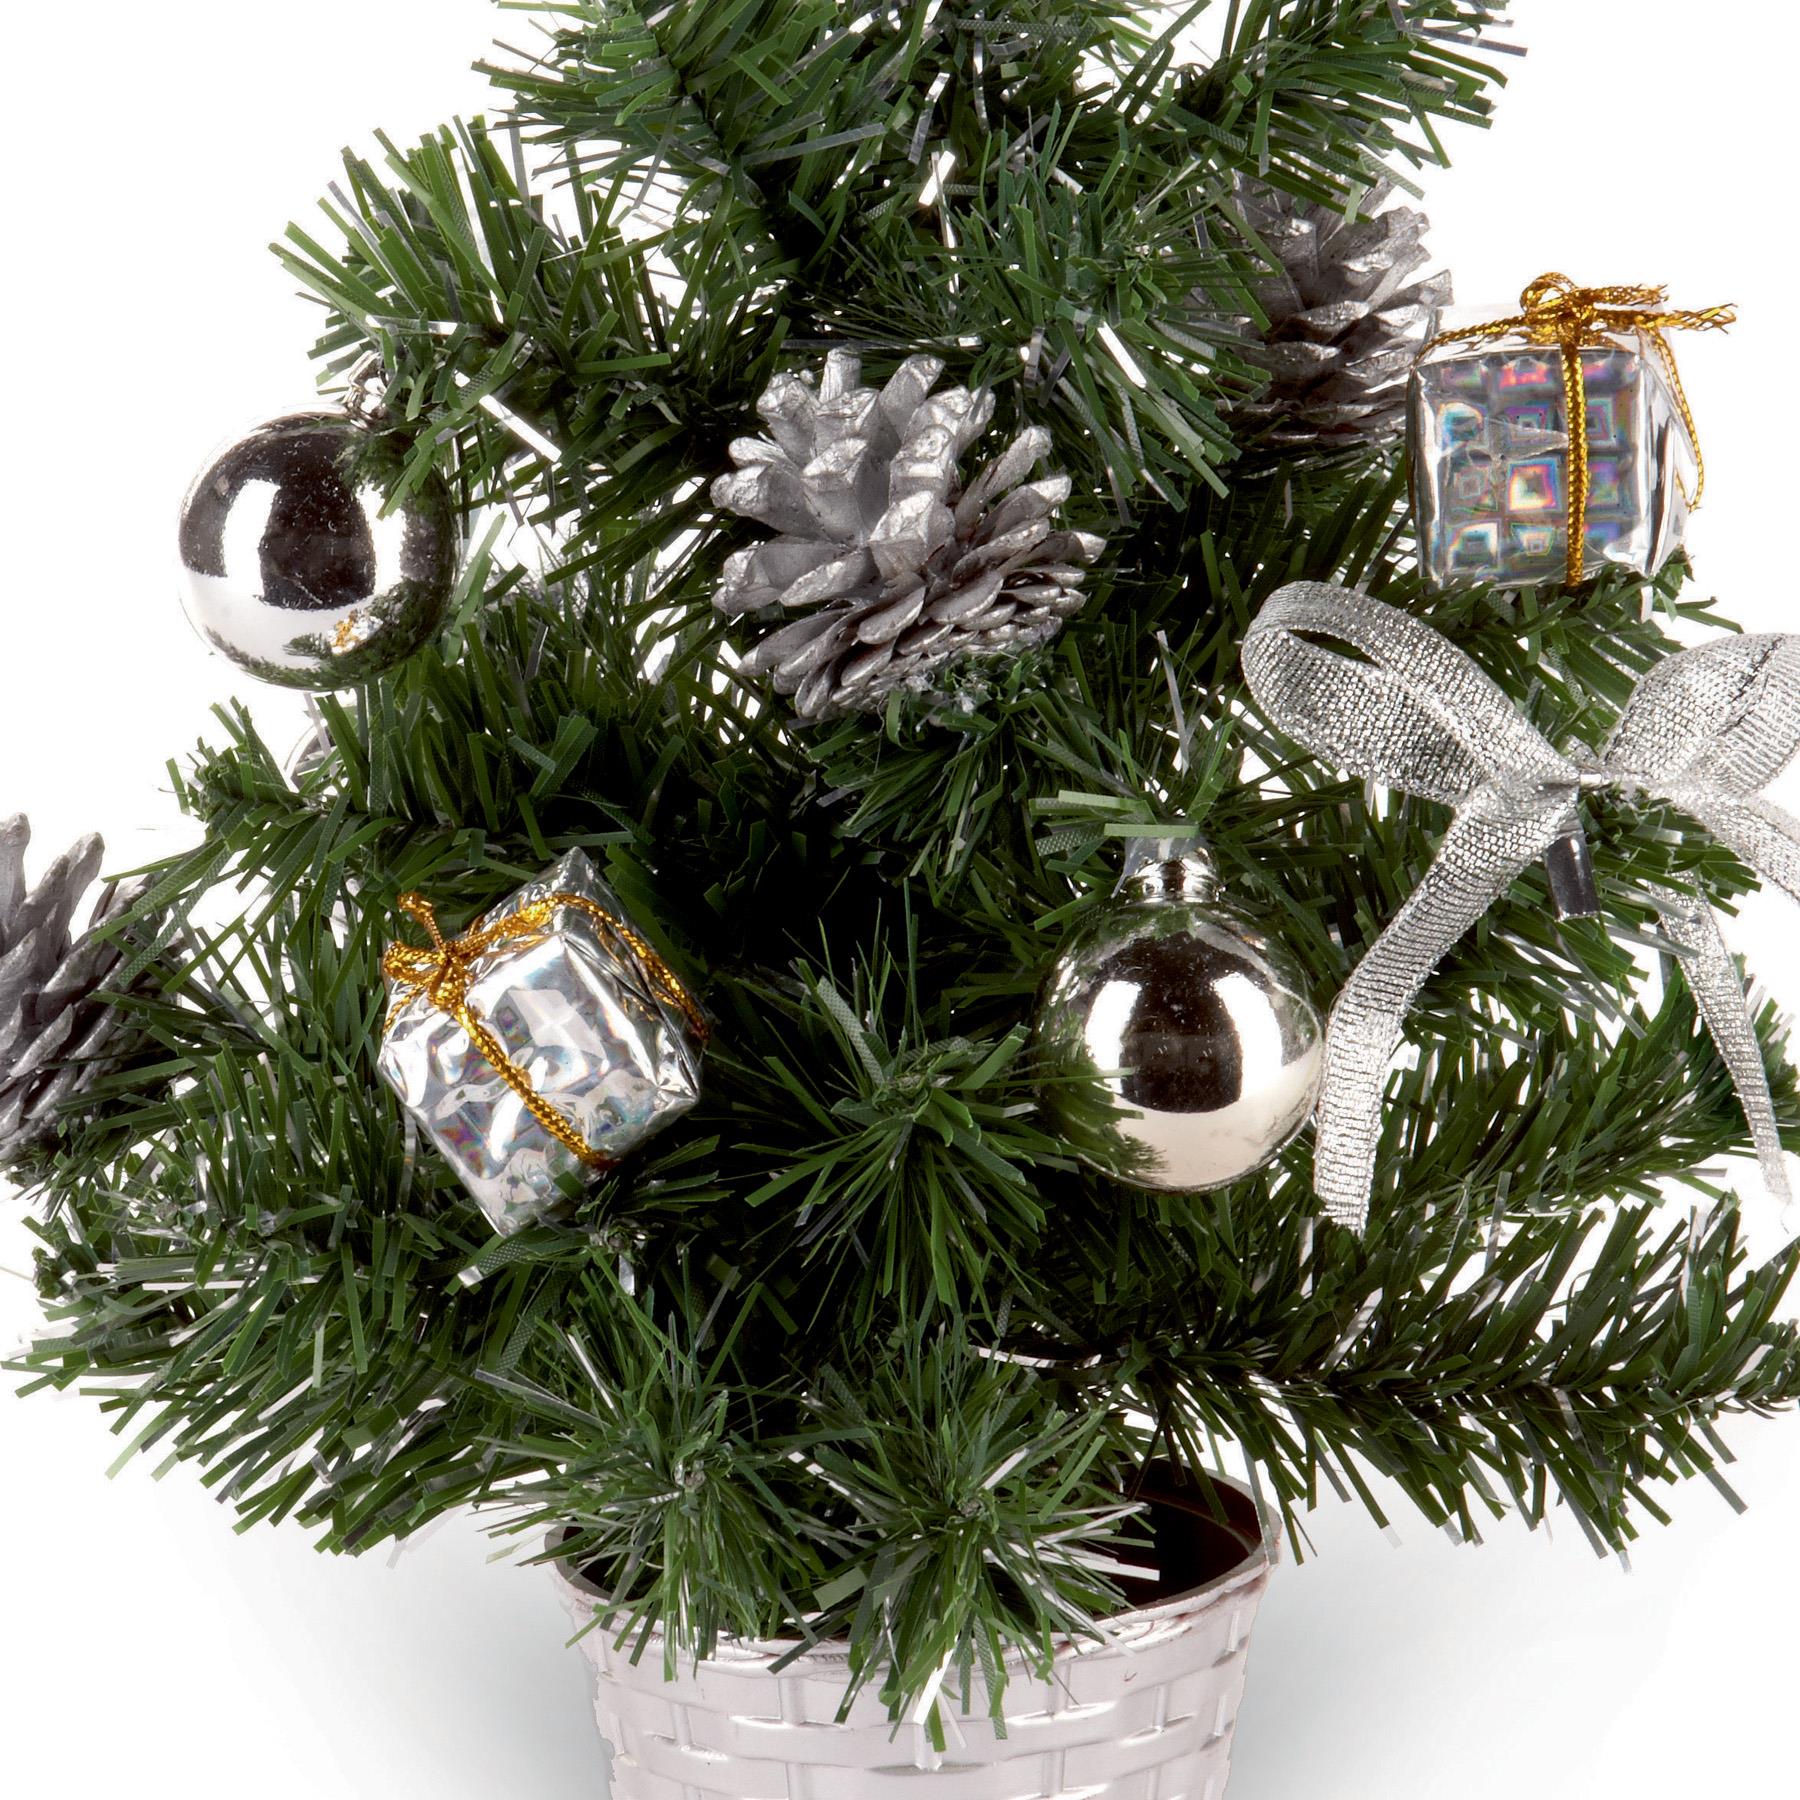 30cm Artificial Christmas Tree with Silver Tinsel Flecks, Silver Decorations and Pine Cones